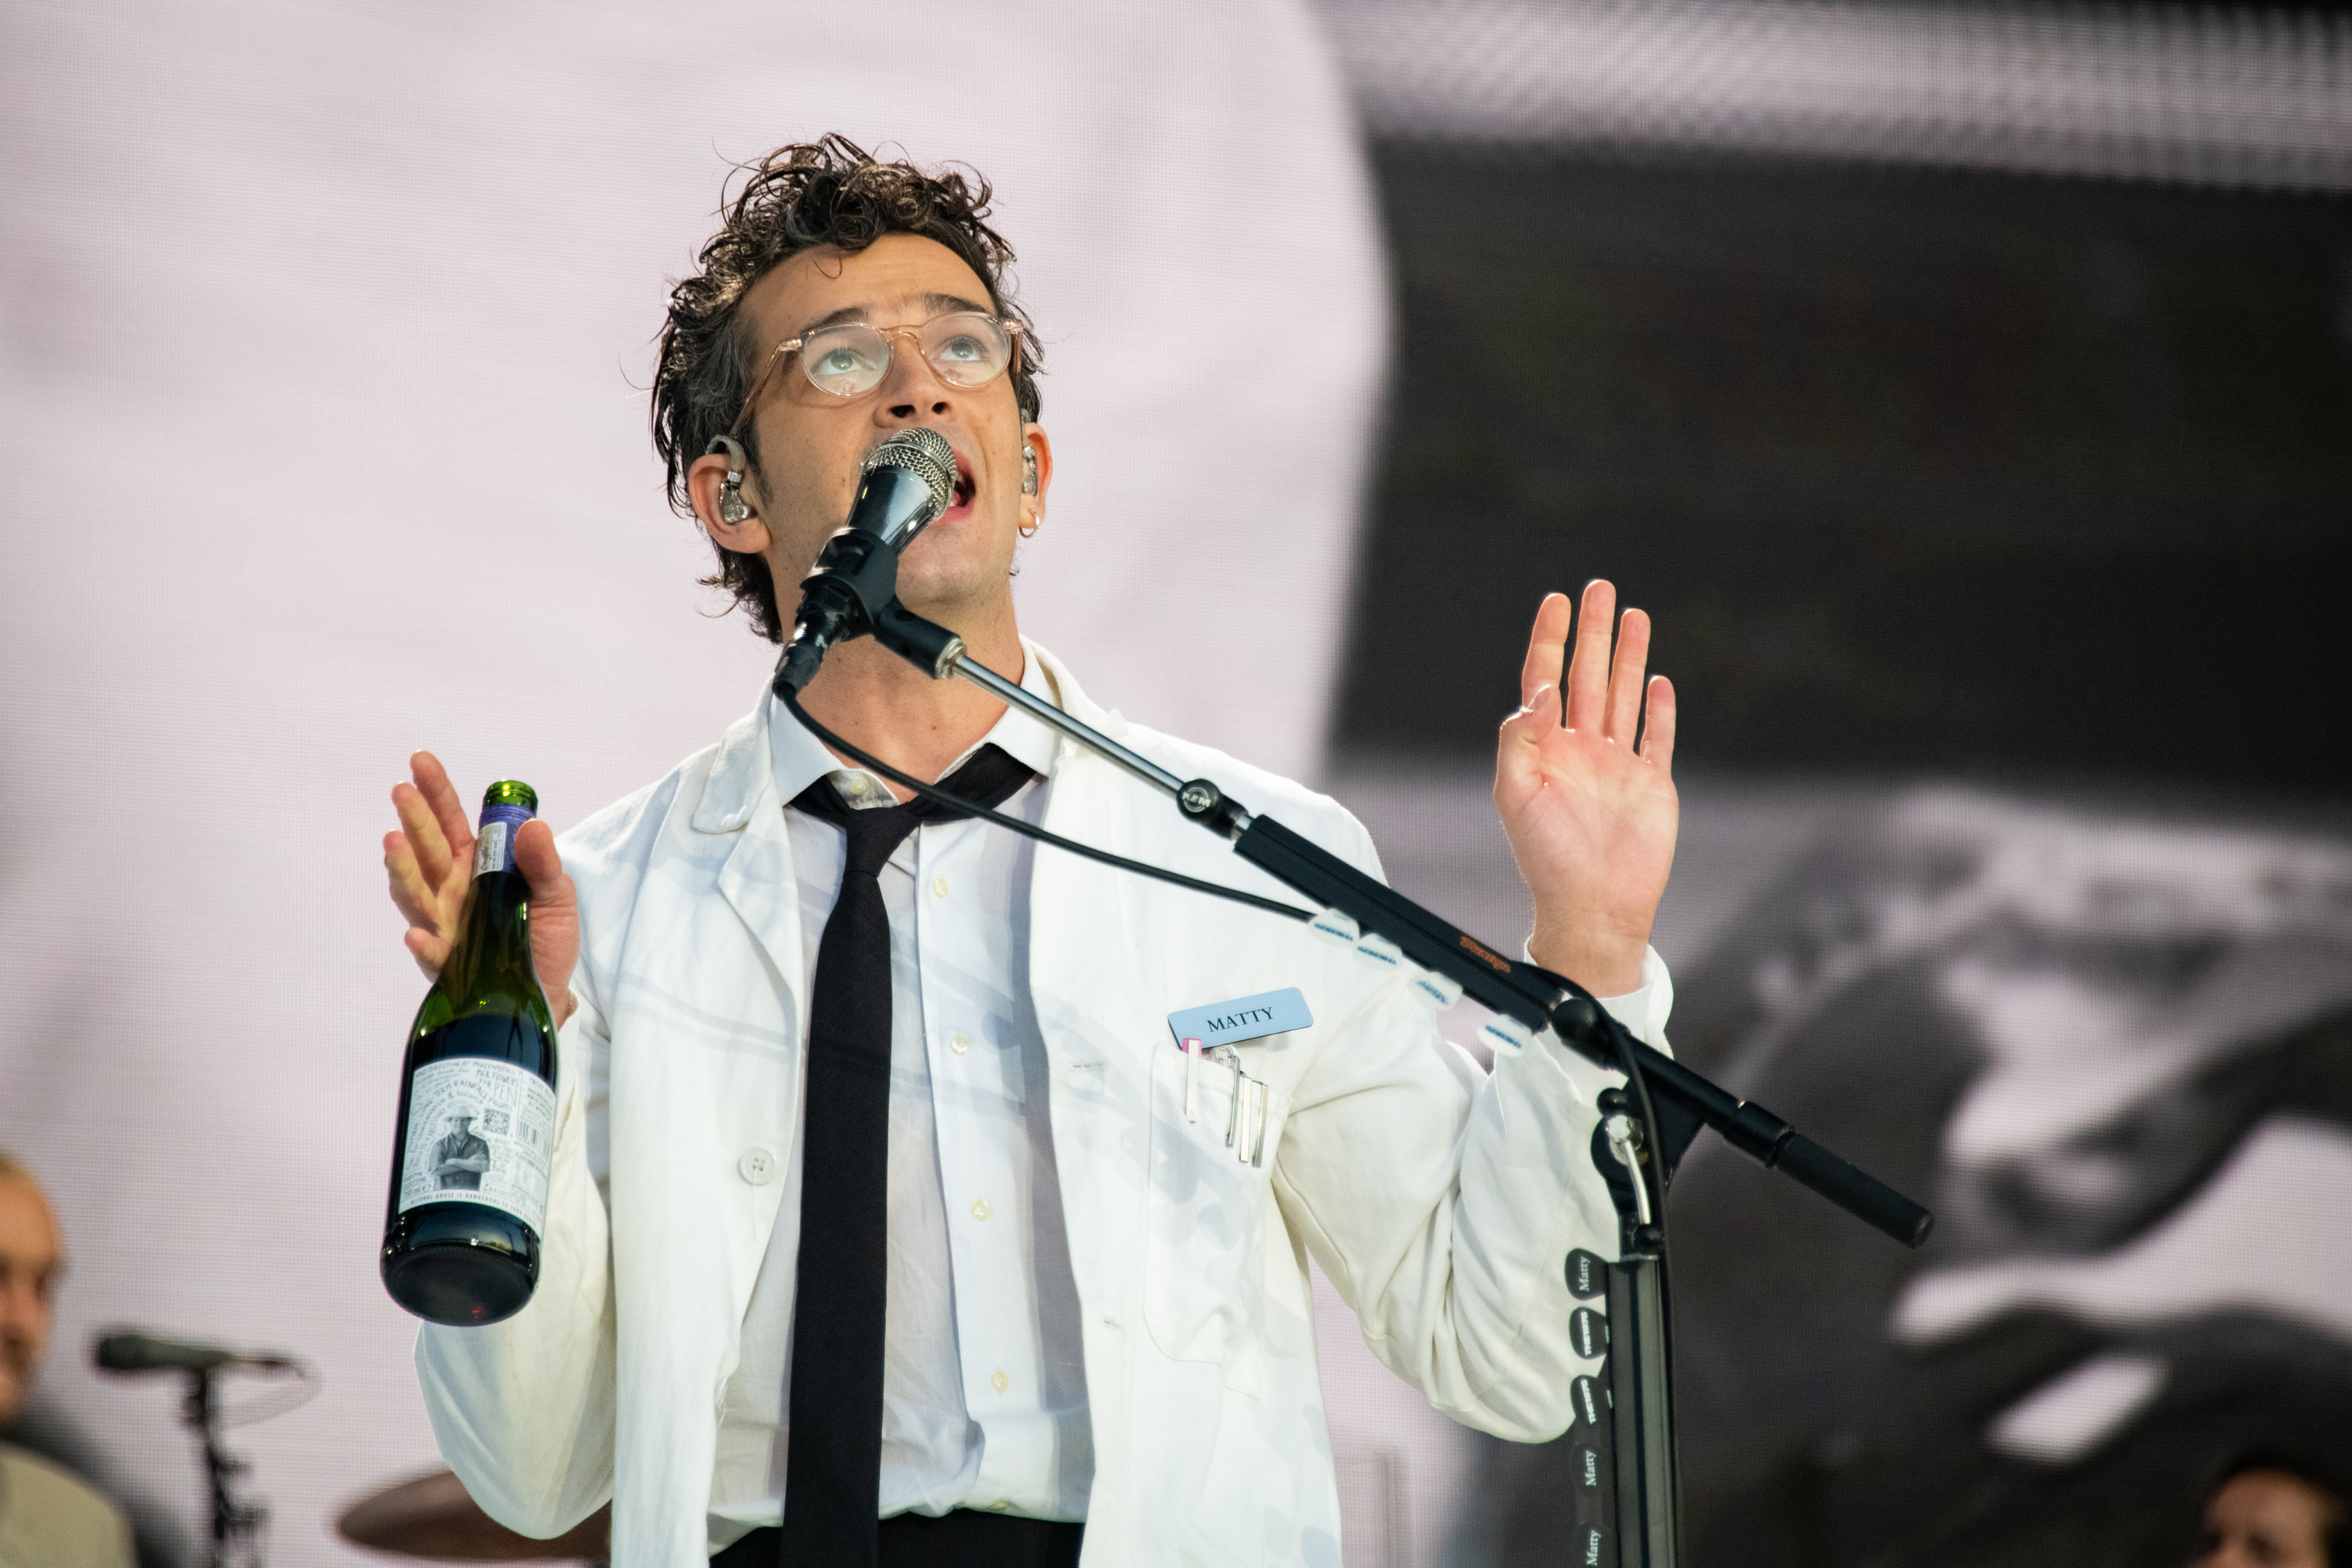 Matt holding a bottle of wine during a performance in which his wearing what looks like a lab coat and a name tag